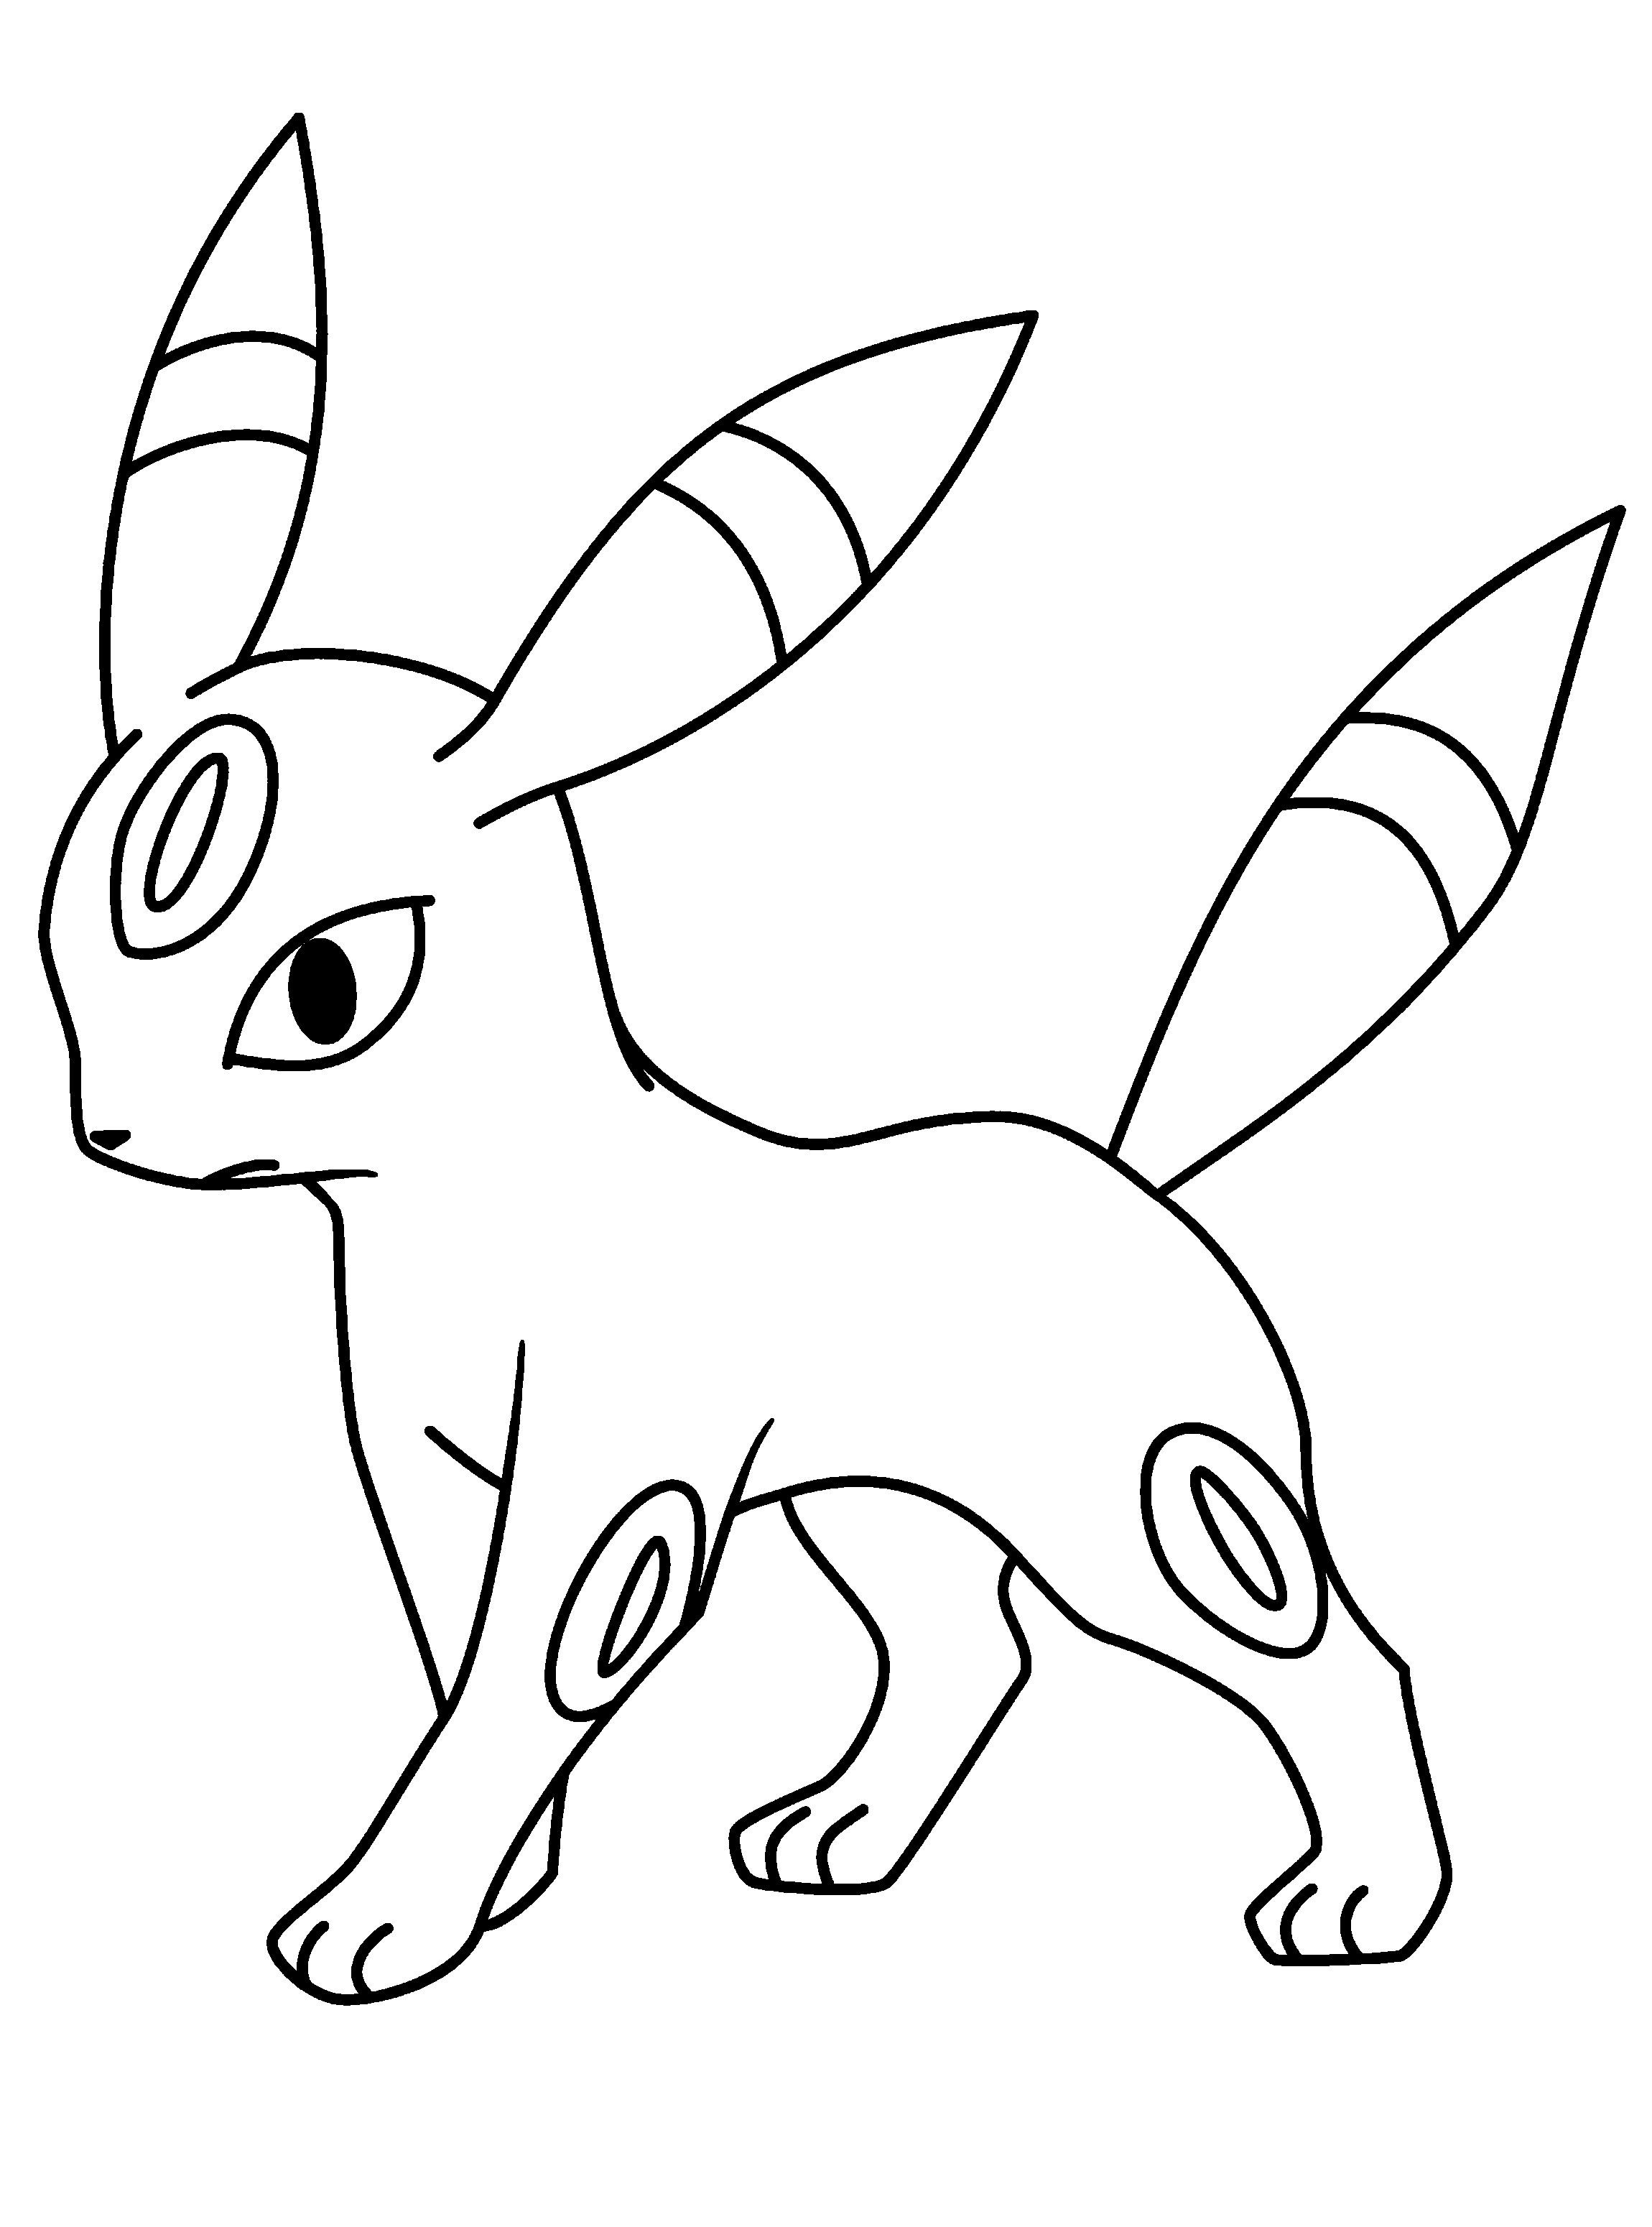 Pokemon Umbreon Coloring Pages For Kids Gog Printable Pokemon Coloring Pages For Kids